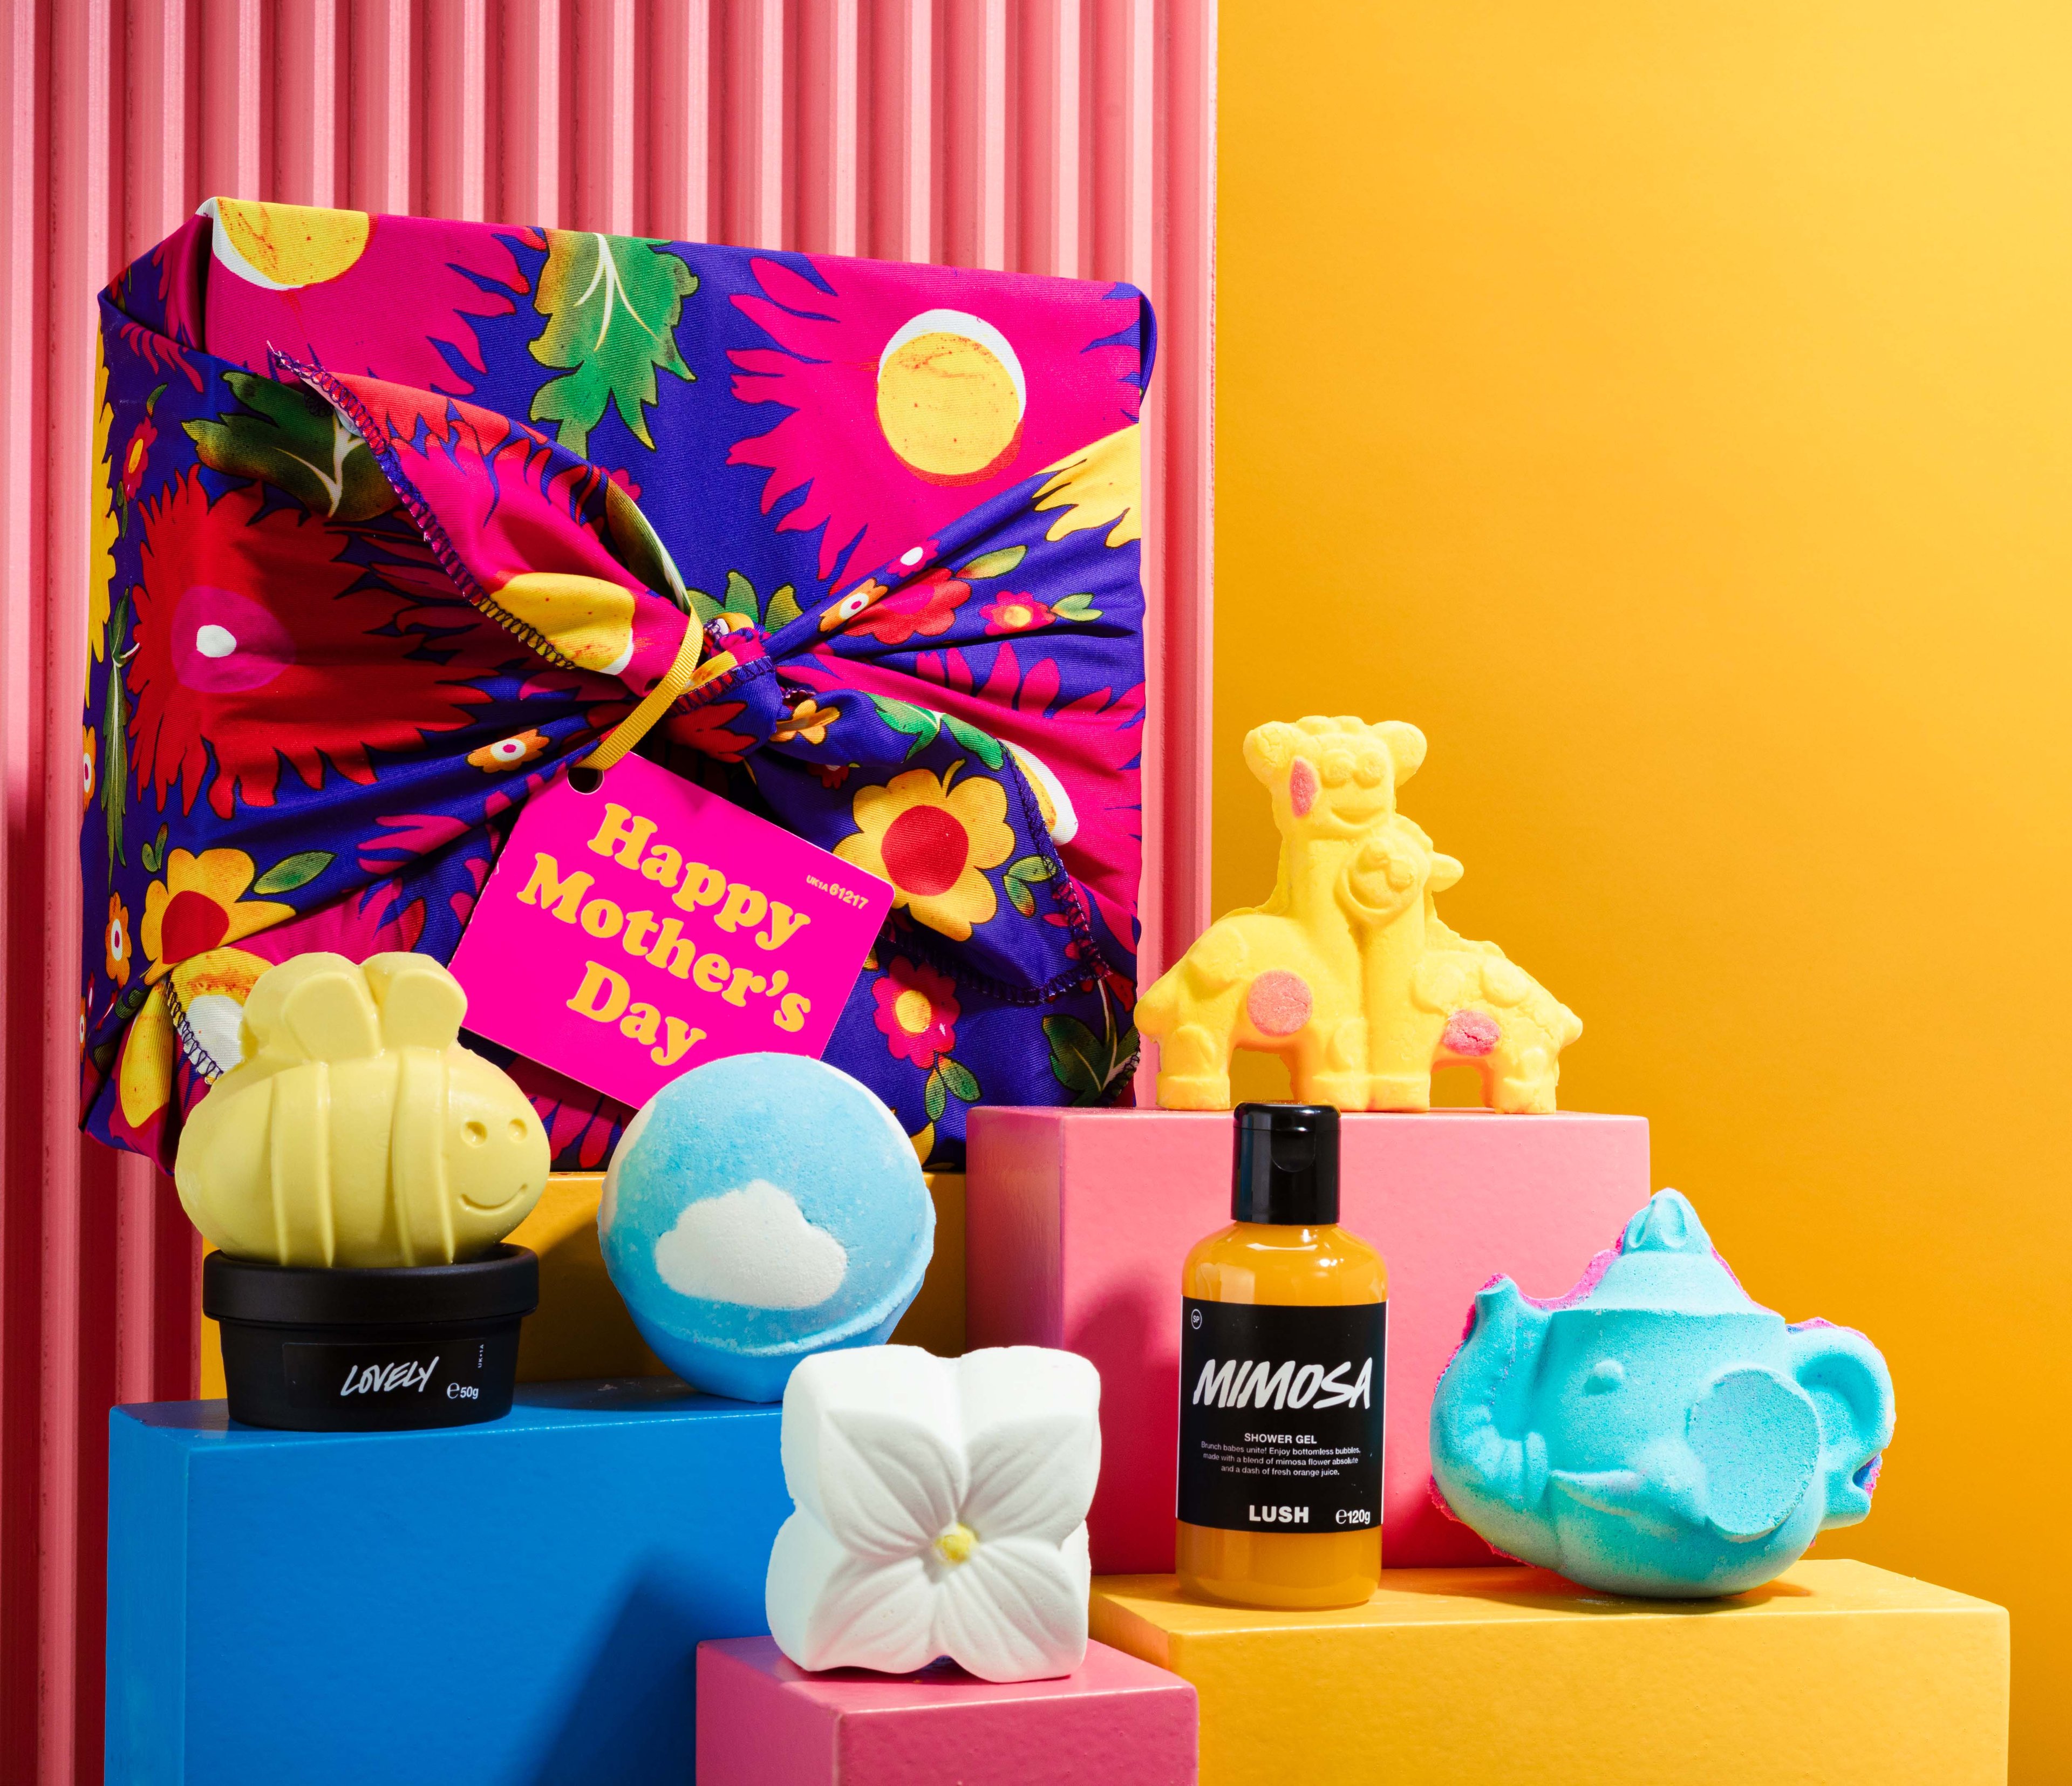 The gift sits face up on a soft pink background, surrounded by its product contents lying flat. 